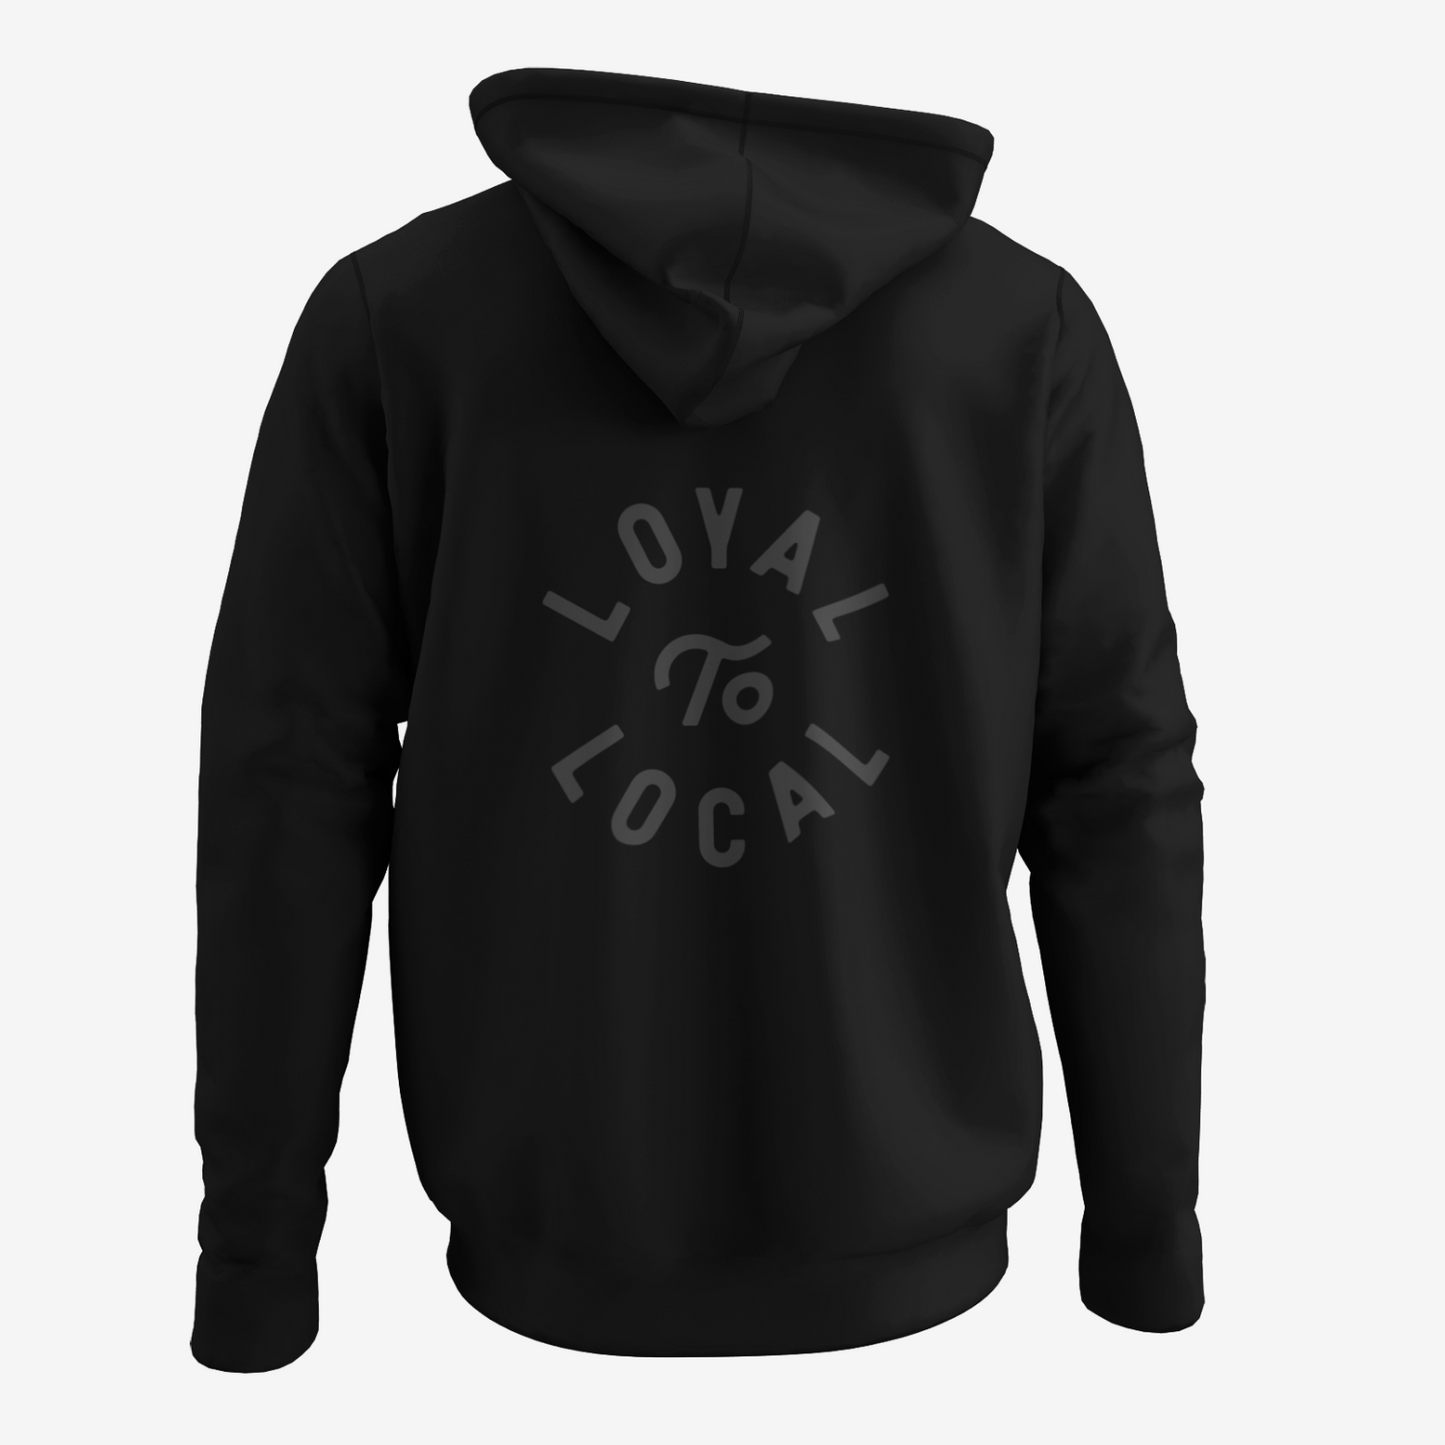 Loyal To Local Zip Up Hoodie | Charcoal on Black